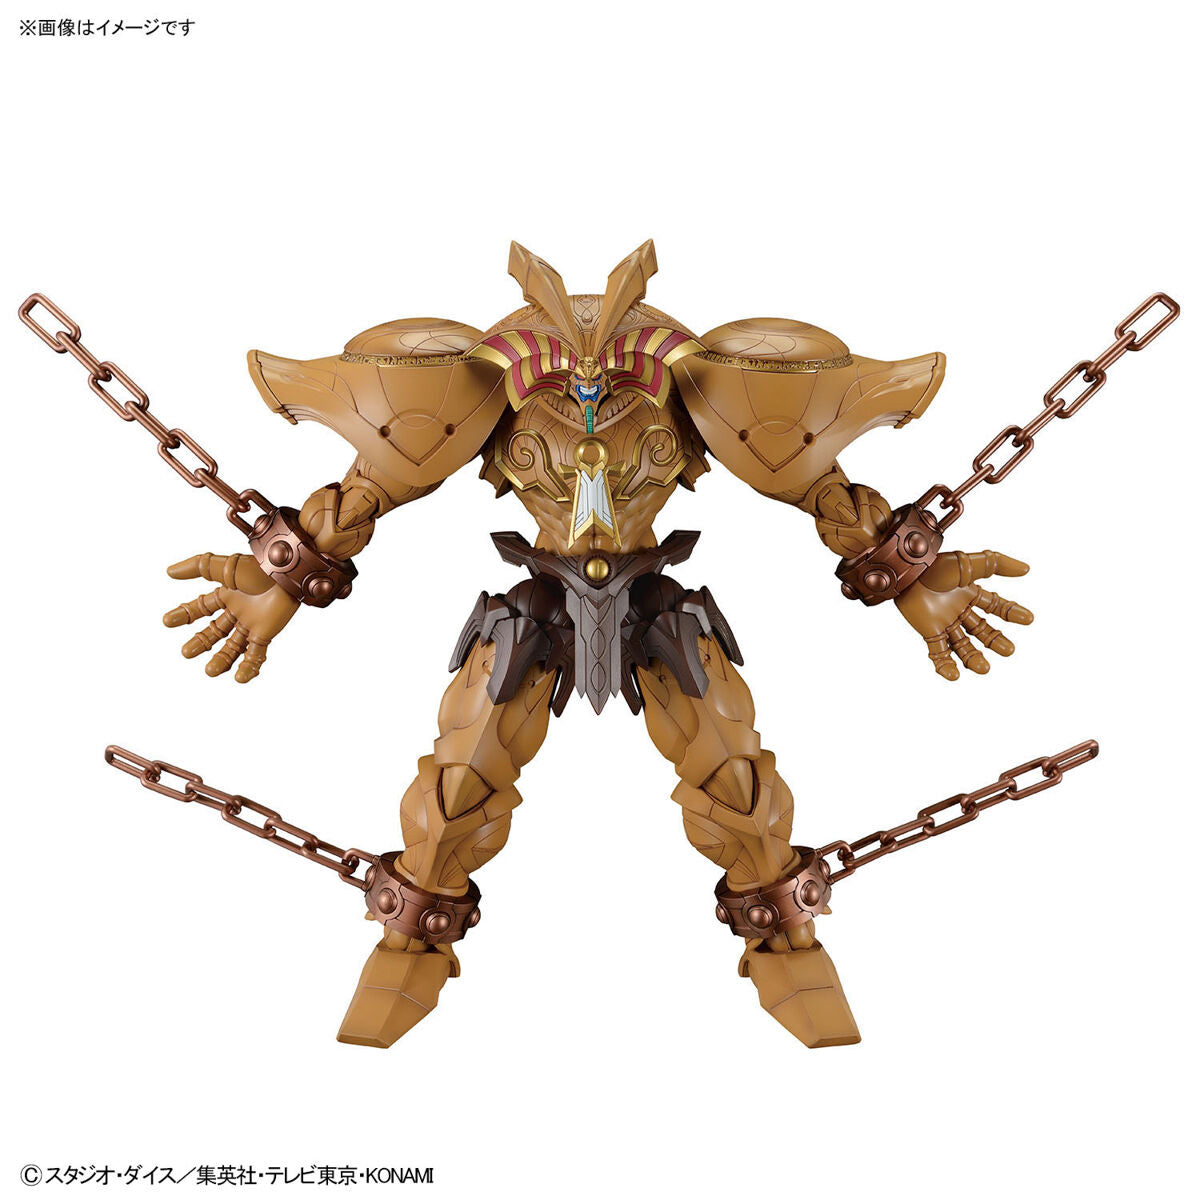 Image alt text: Yu-Gi-Oh! -Duel Monsters - The Legendary Exodia Incarnate - Figure-rise Standard Amplified Model Kit, Summoned God Exodia brought to life in impressive scale, Nippon Figures